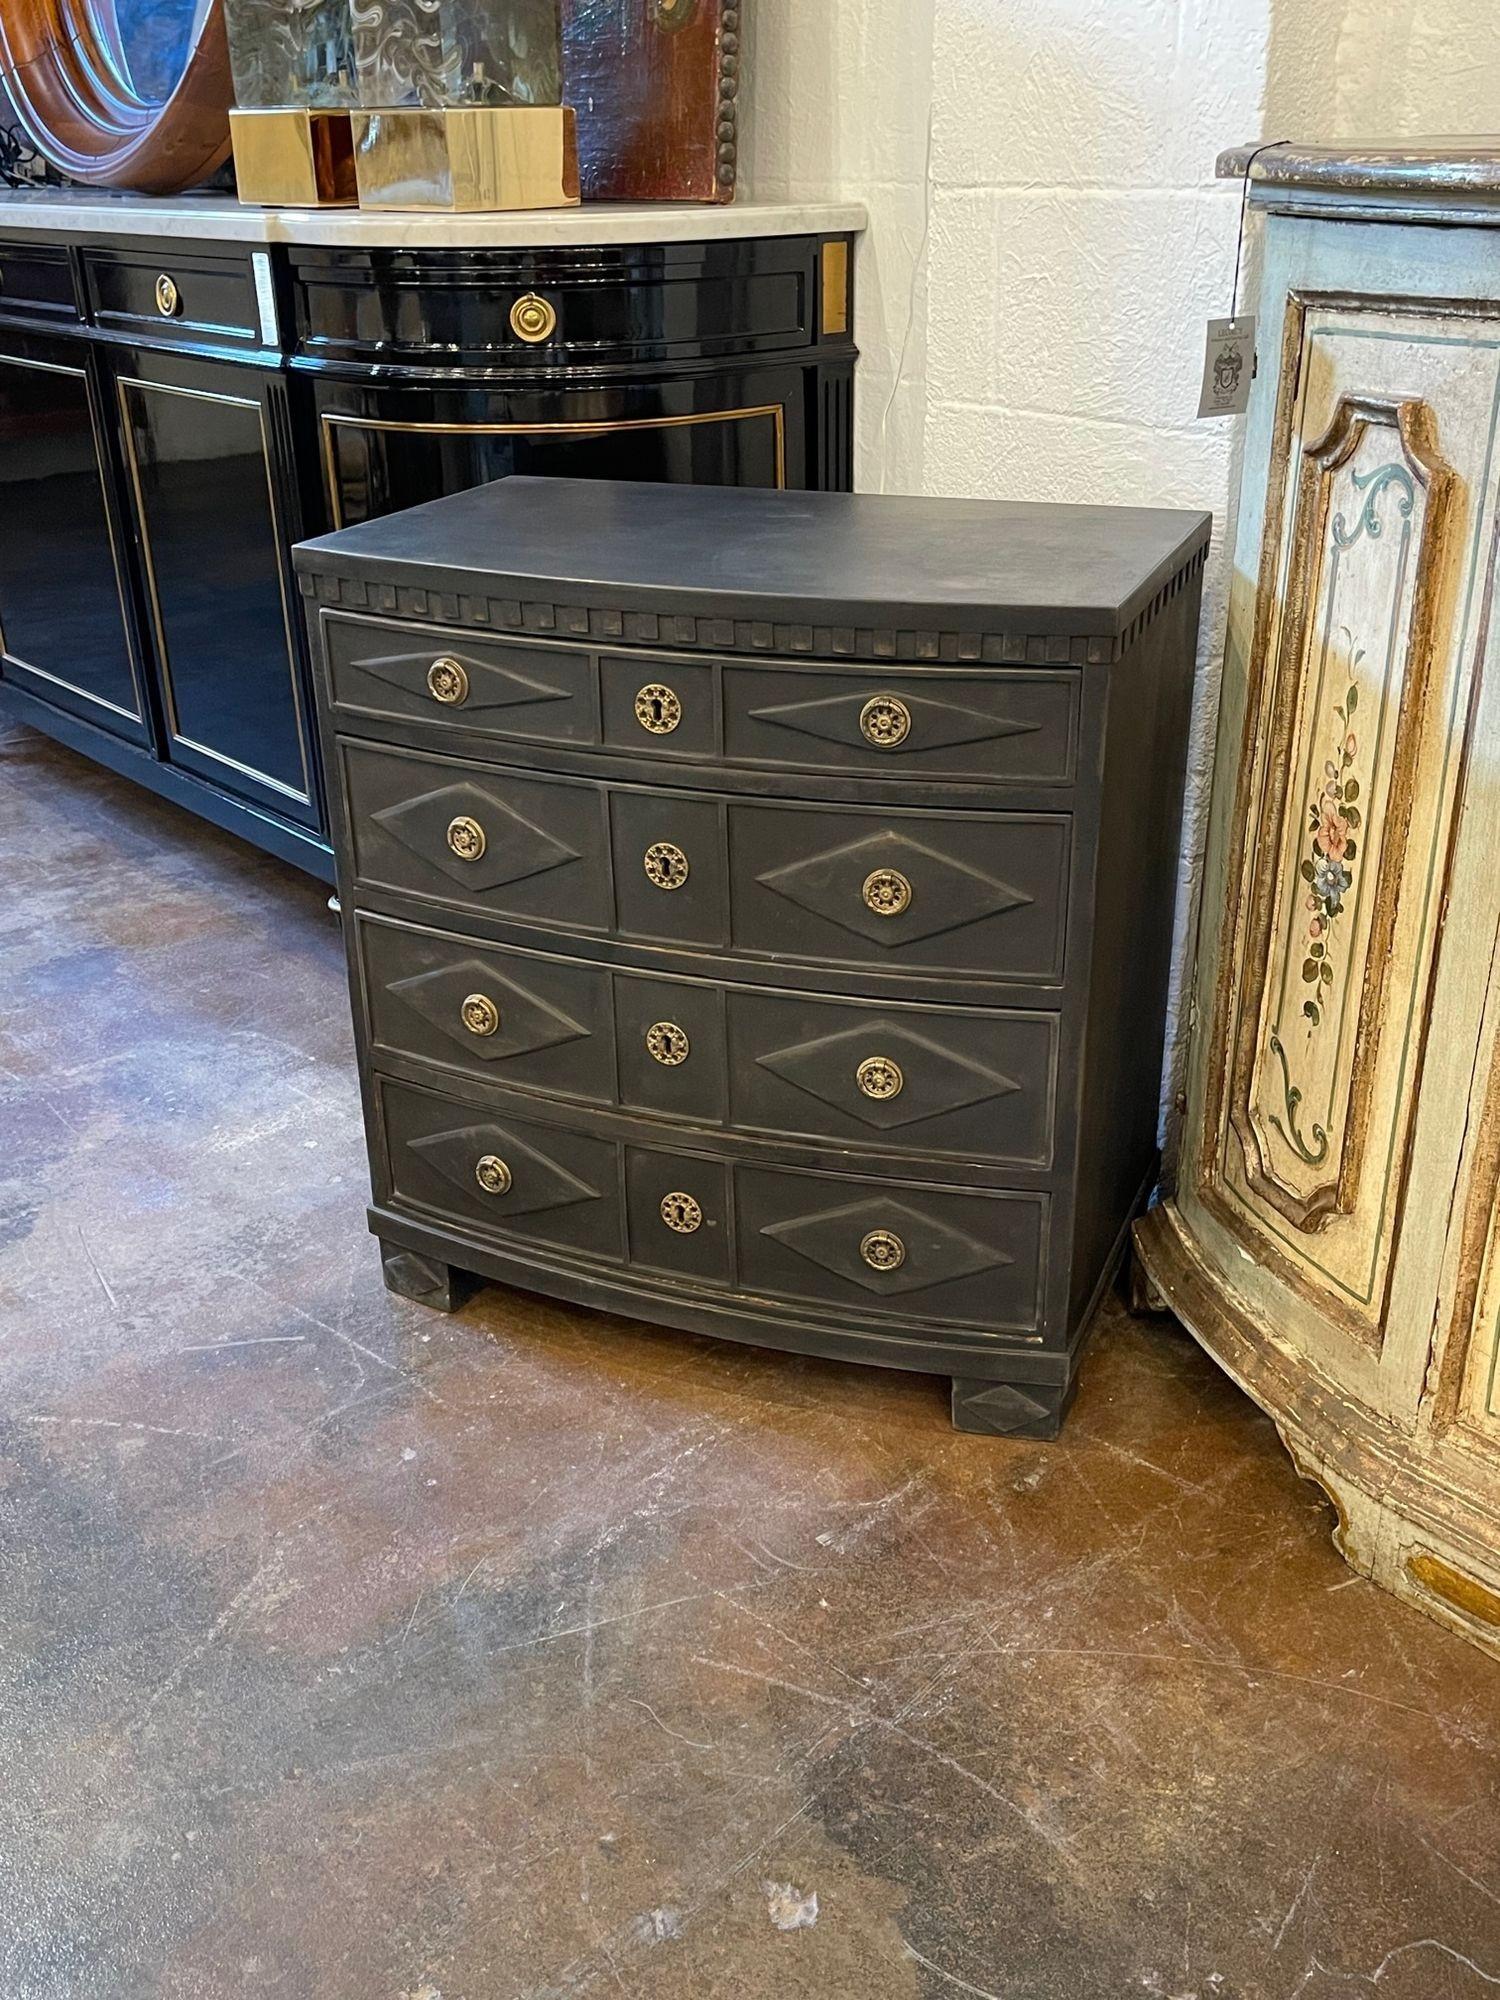 Beautiful 19th century Swedish Empire style painted black chest with decorative bronze hardware. This piece has nice carvings as well. Gorgeous for a variety of decors!